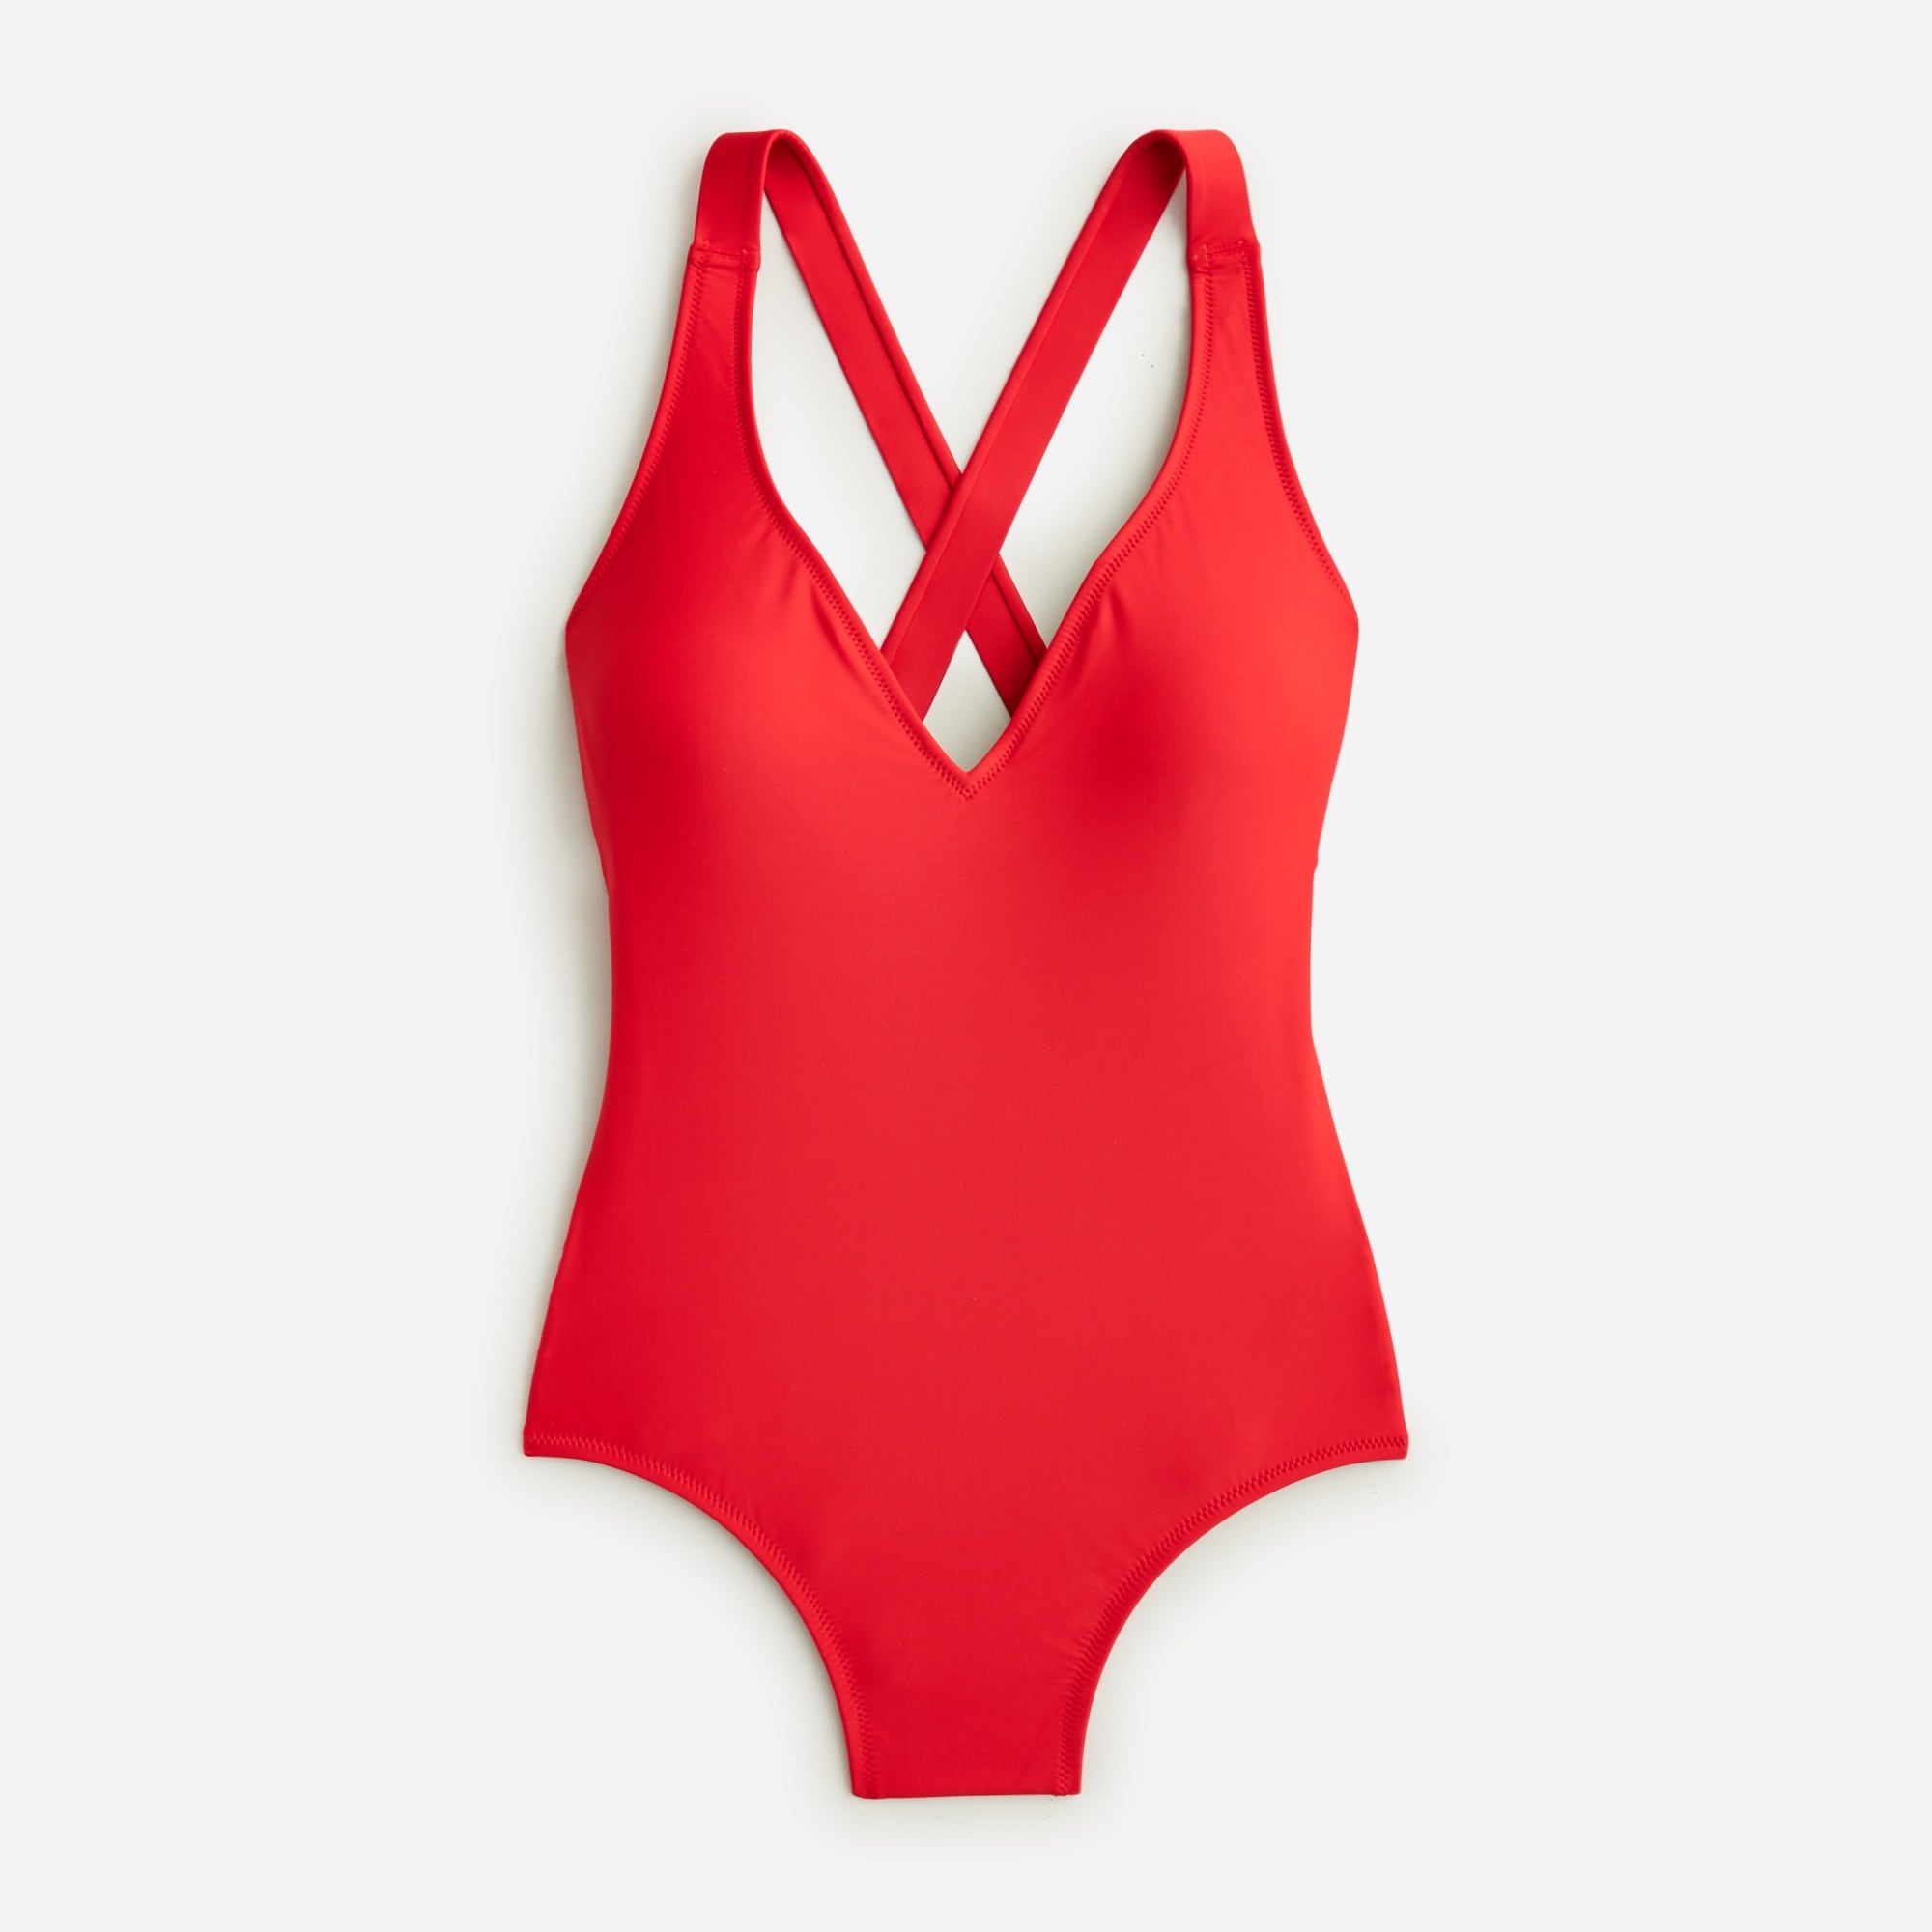 womens High-support cross-back one-piece